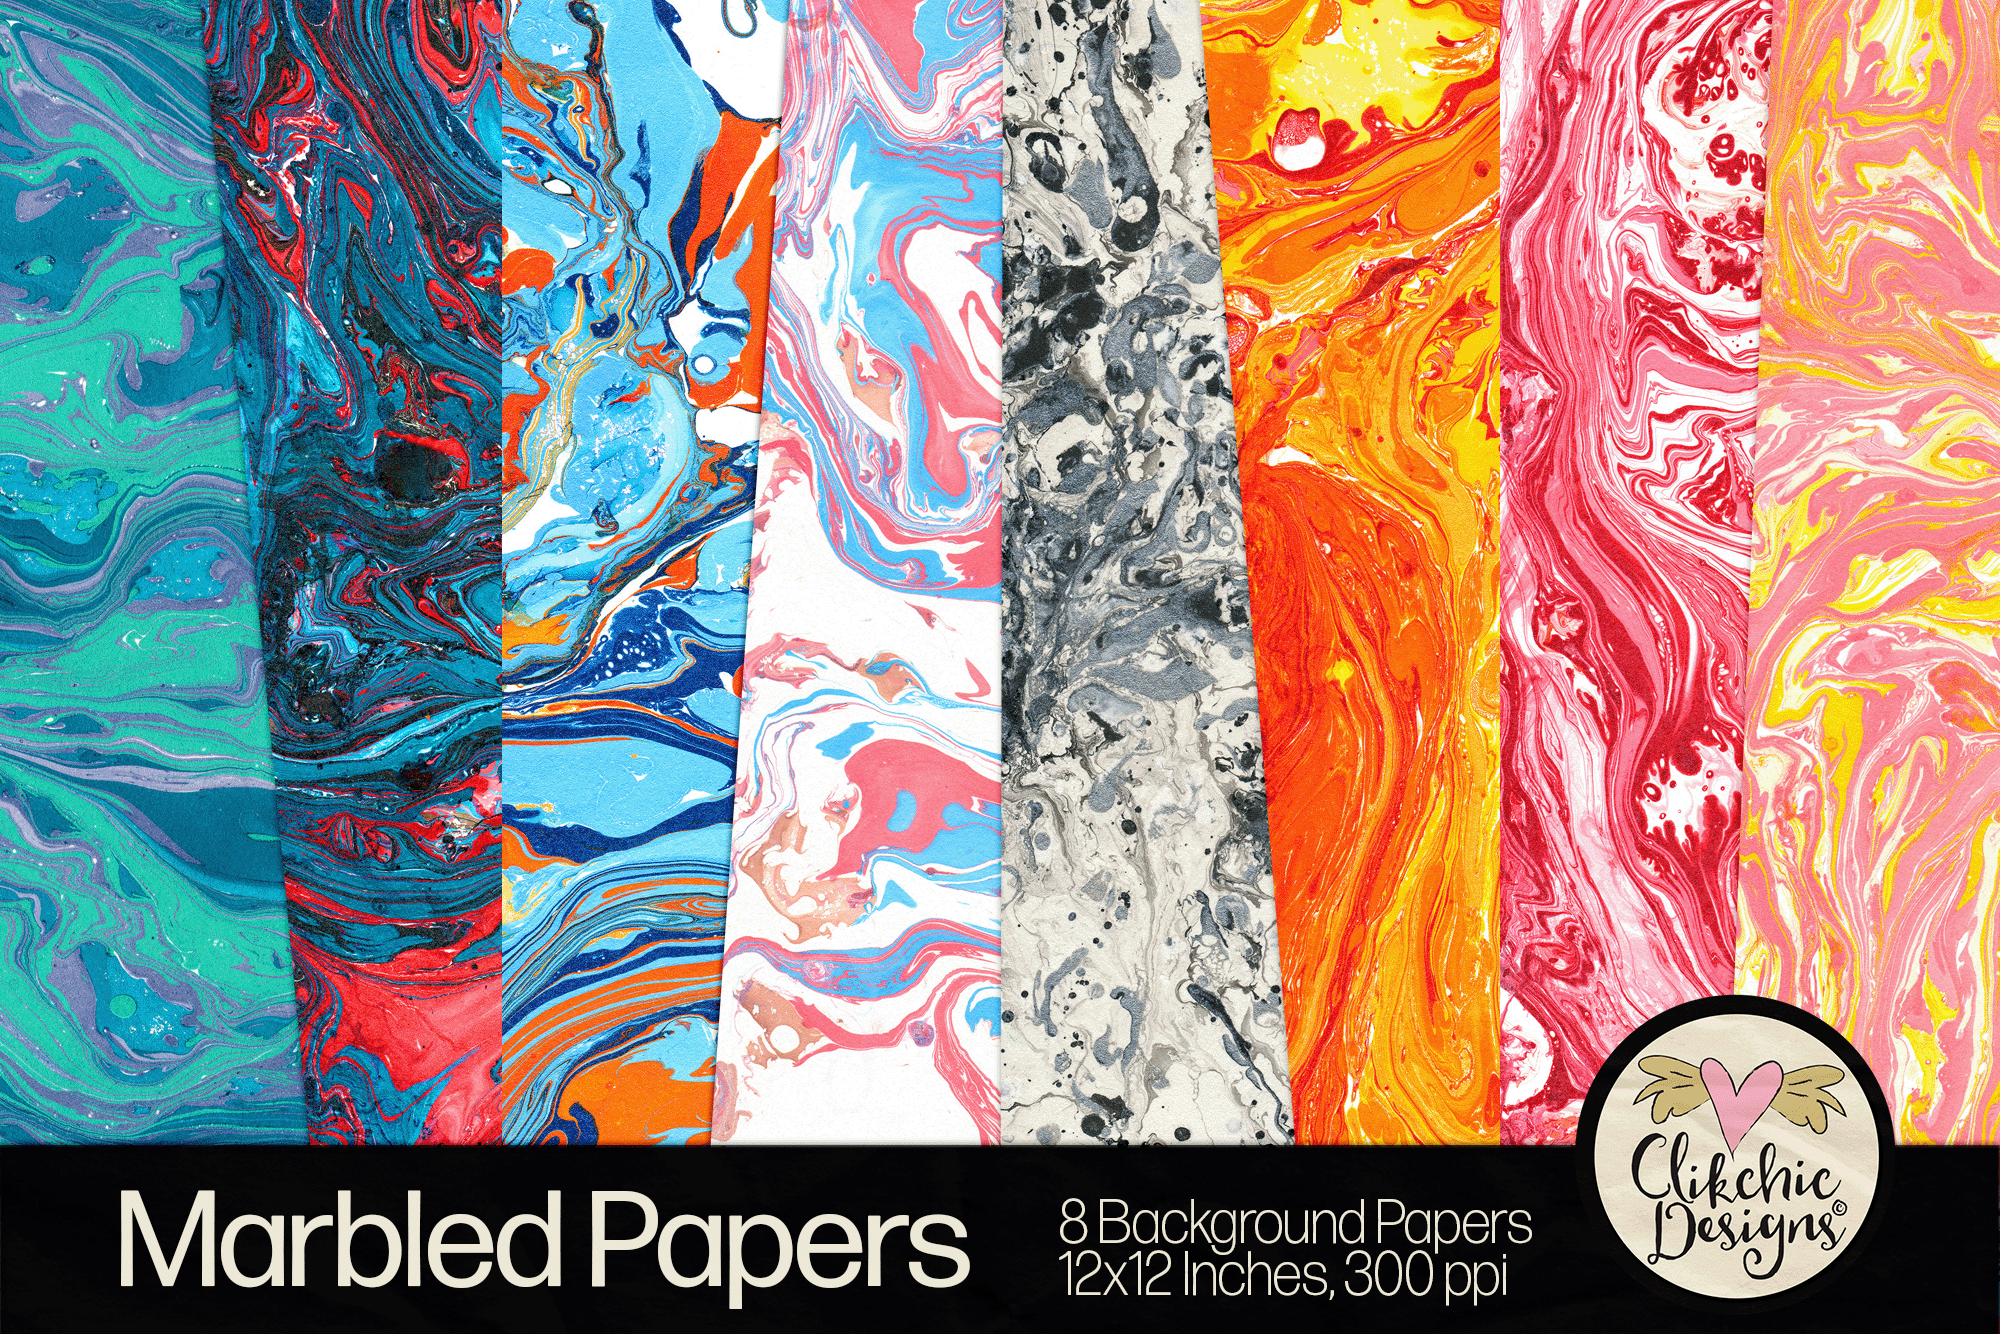 Marbled Background Papers by Clikchic Designs